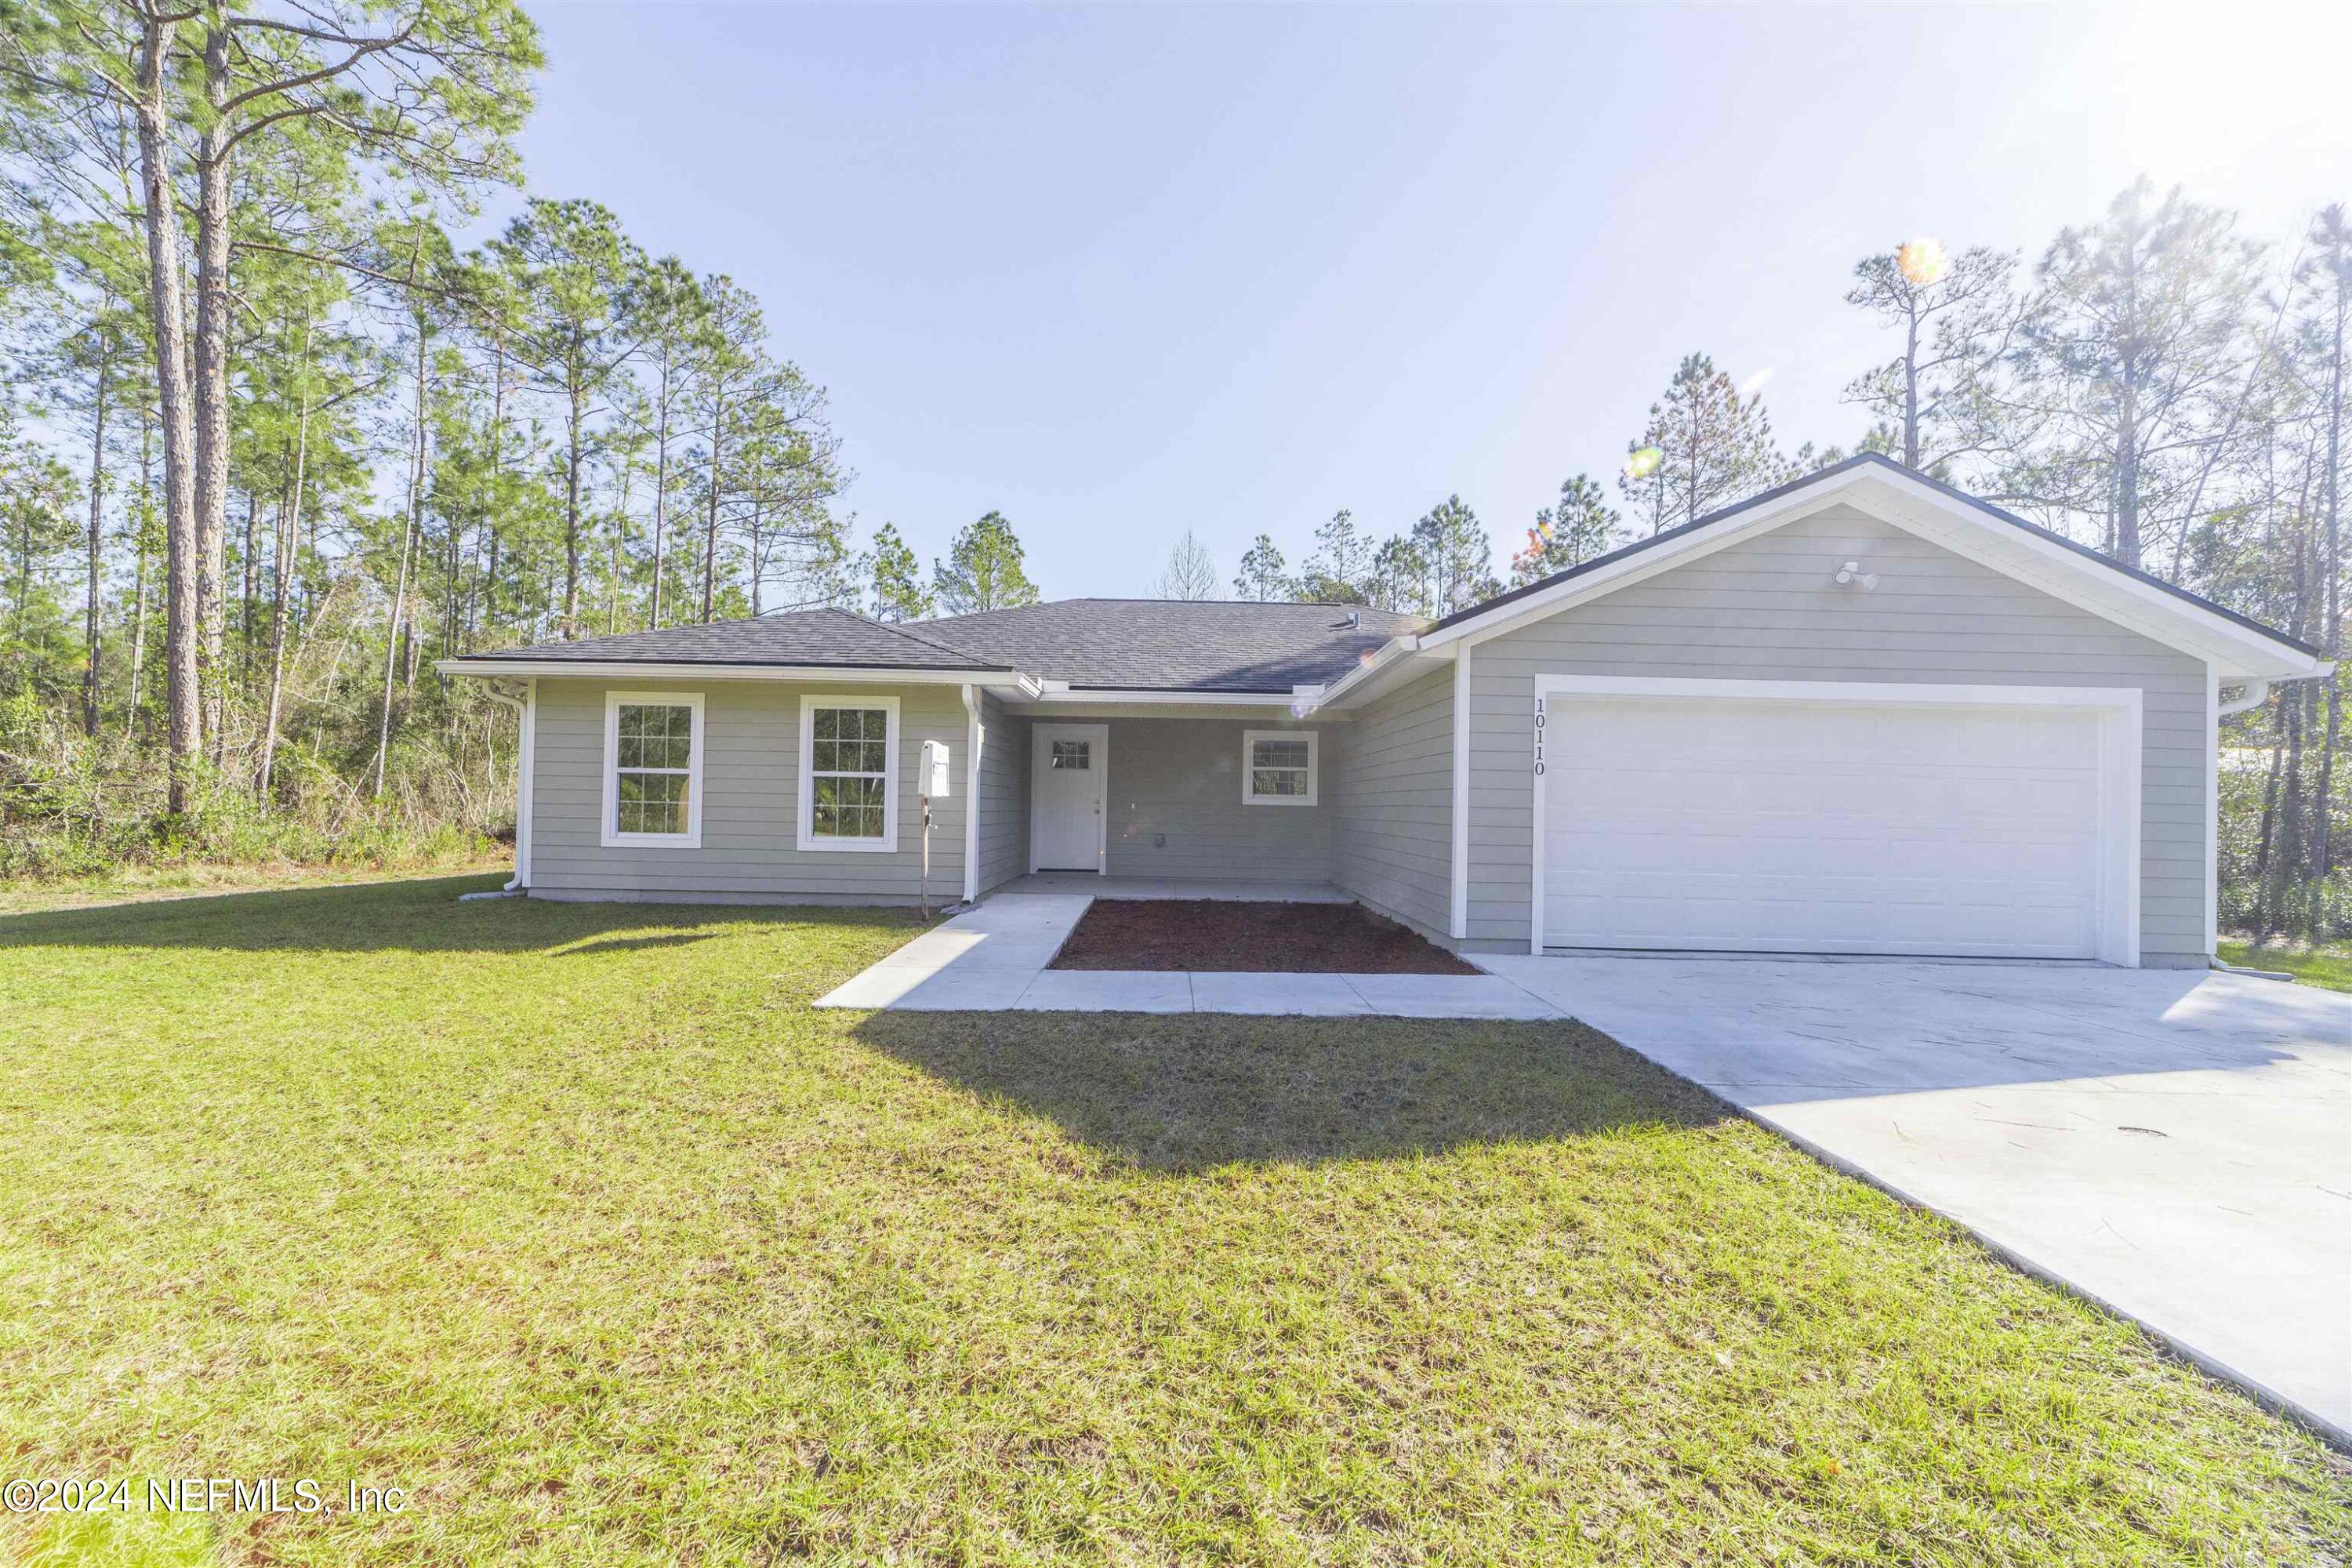 Hastings, FL home for sale located at 10110 Delgado Avenue, Hastings, FL 32145